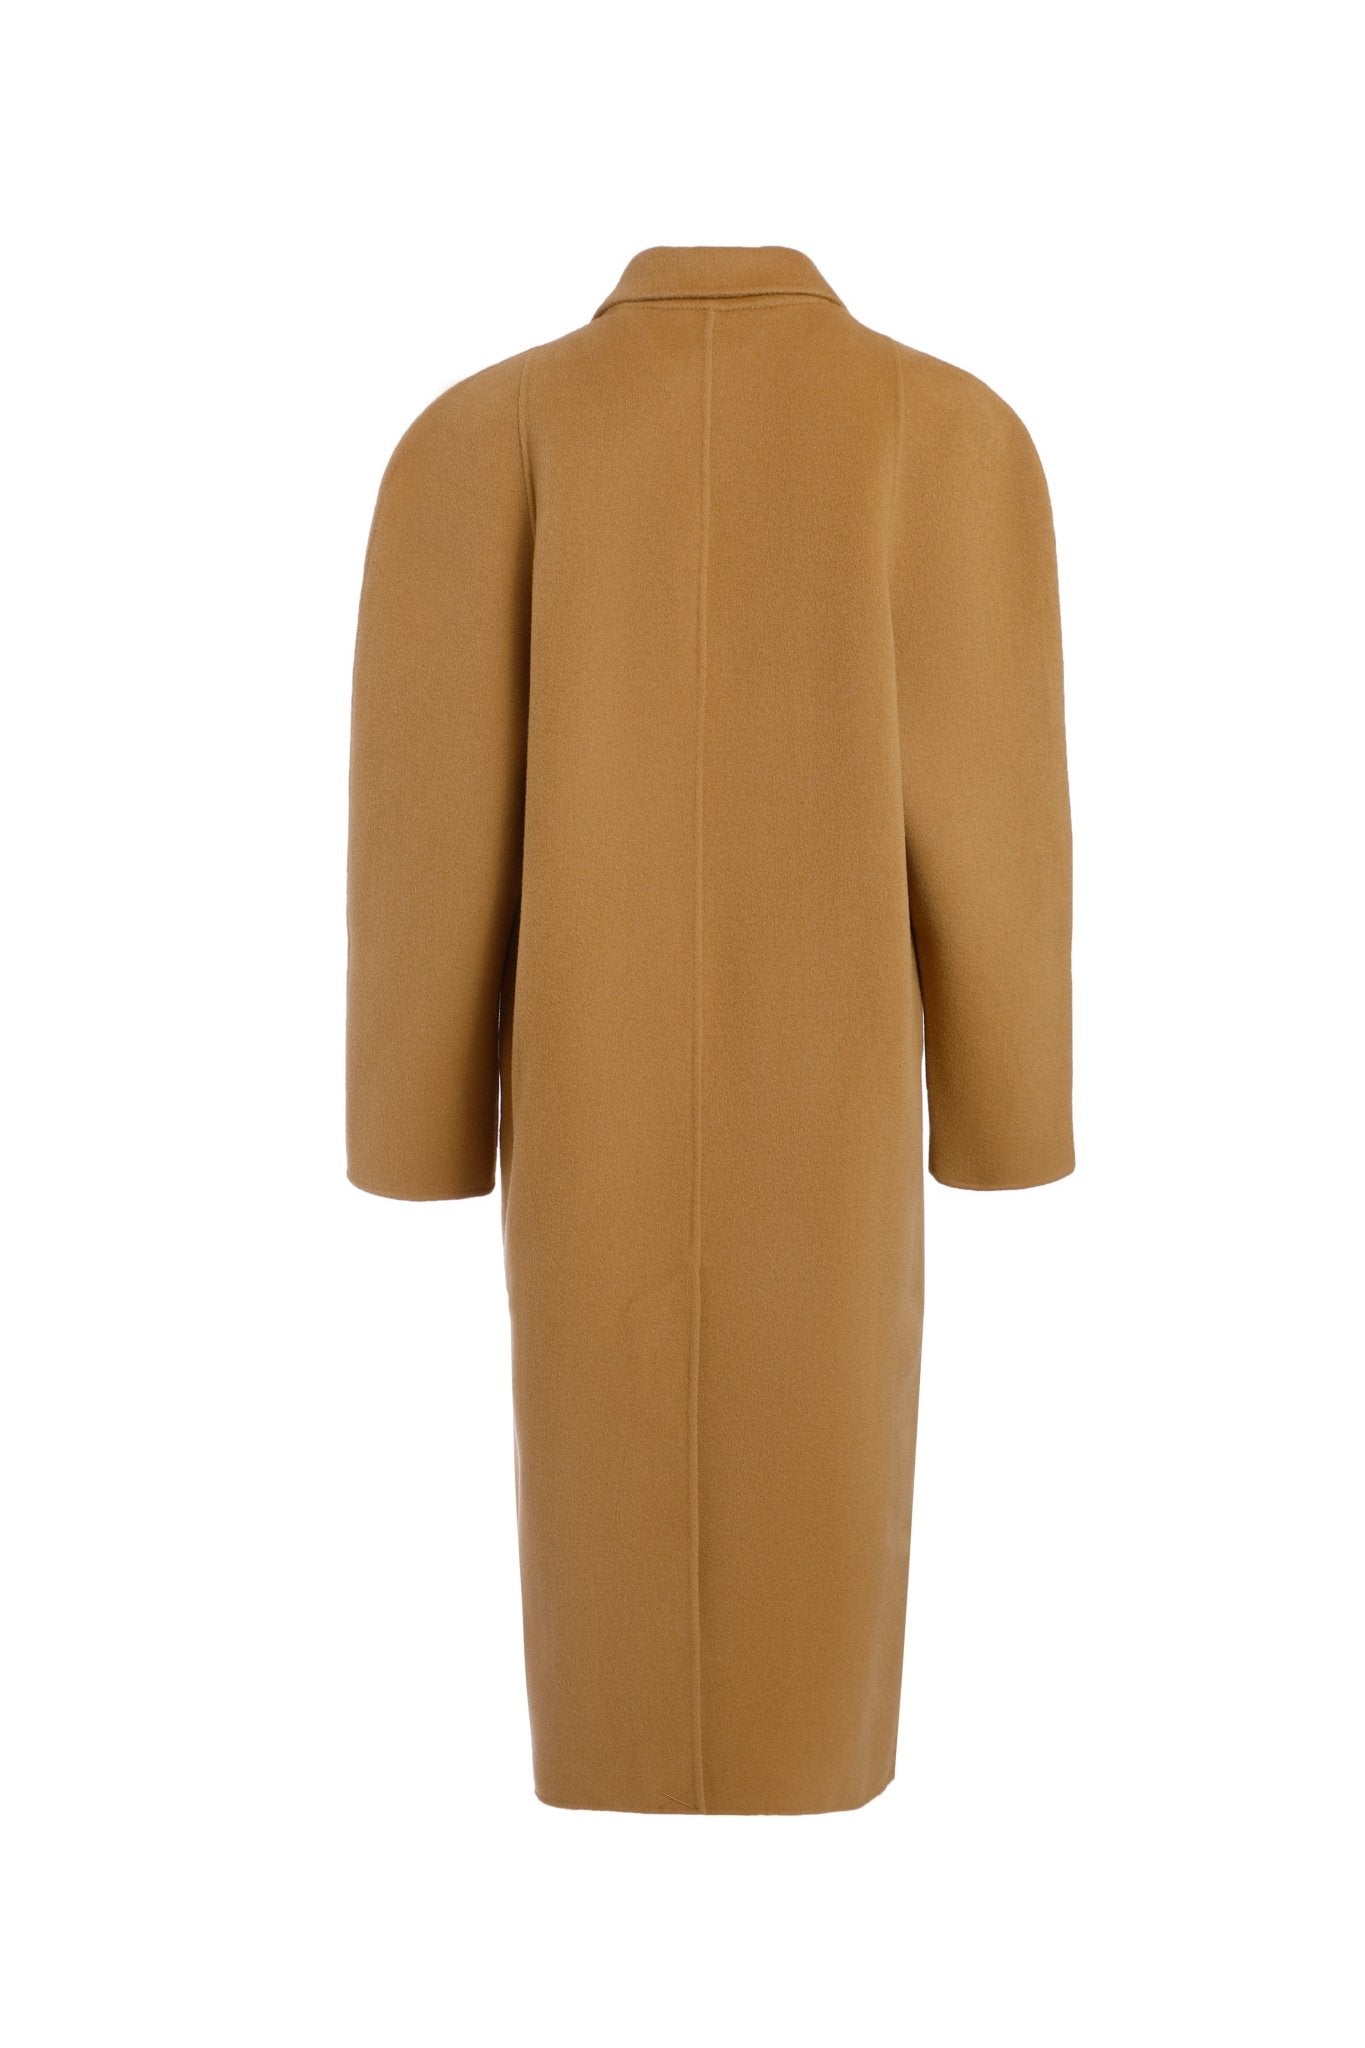 GROUP THERAPY Golden Camel Round Shoulder Long Loose Cashmere Coat | MADA IN CHINA